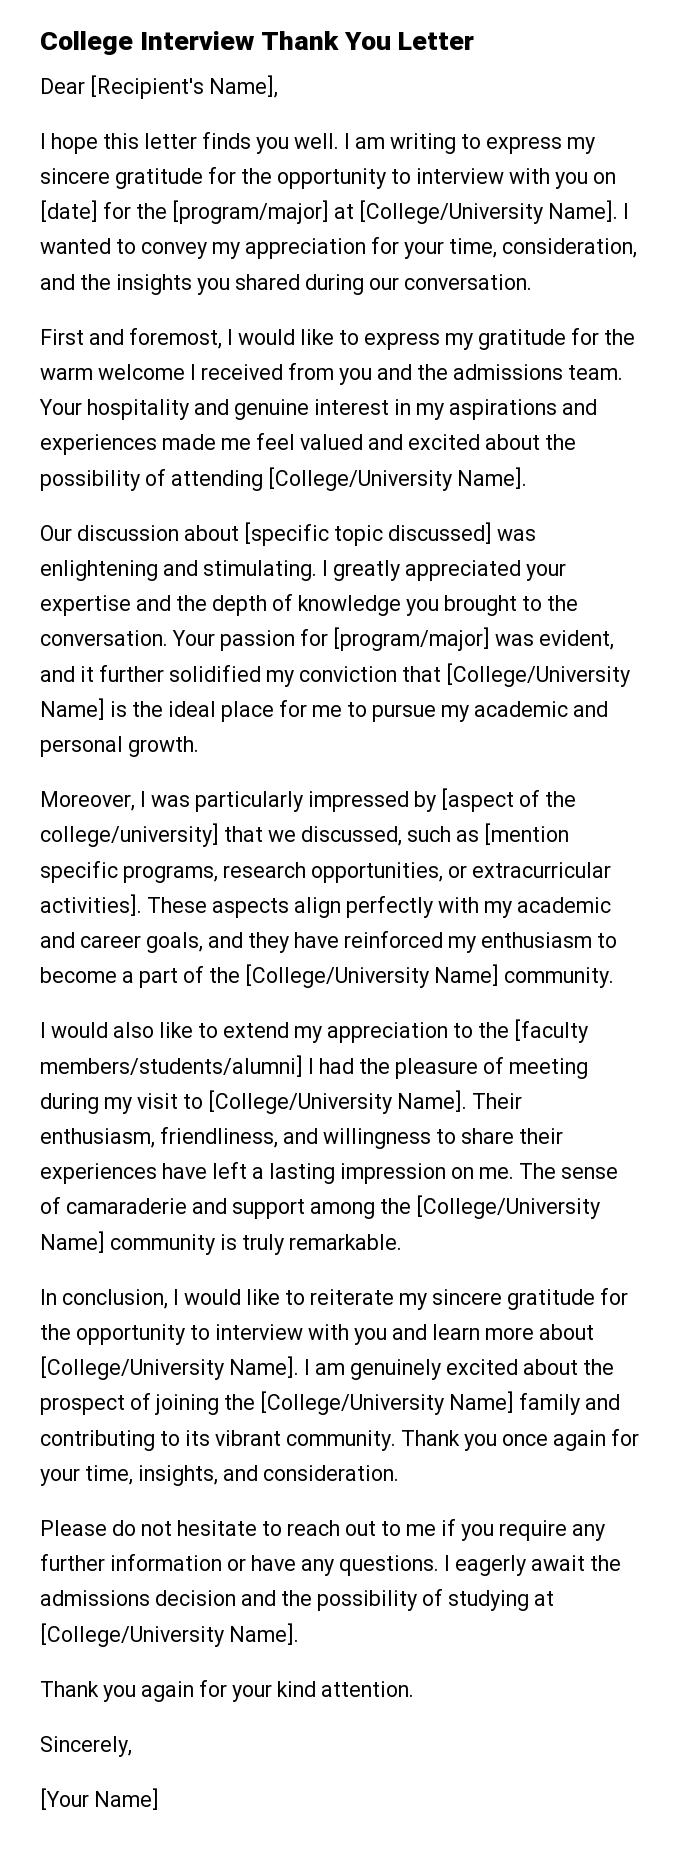 College Interview Thank You Letter